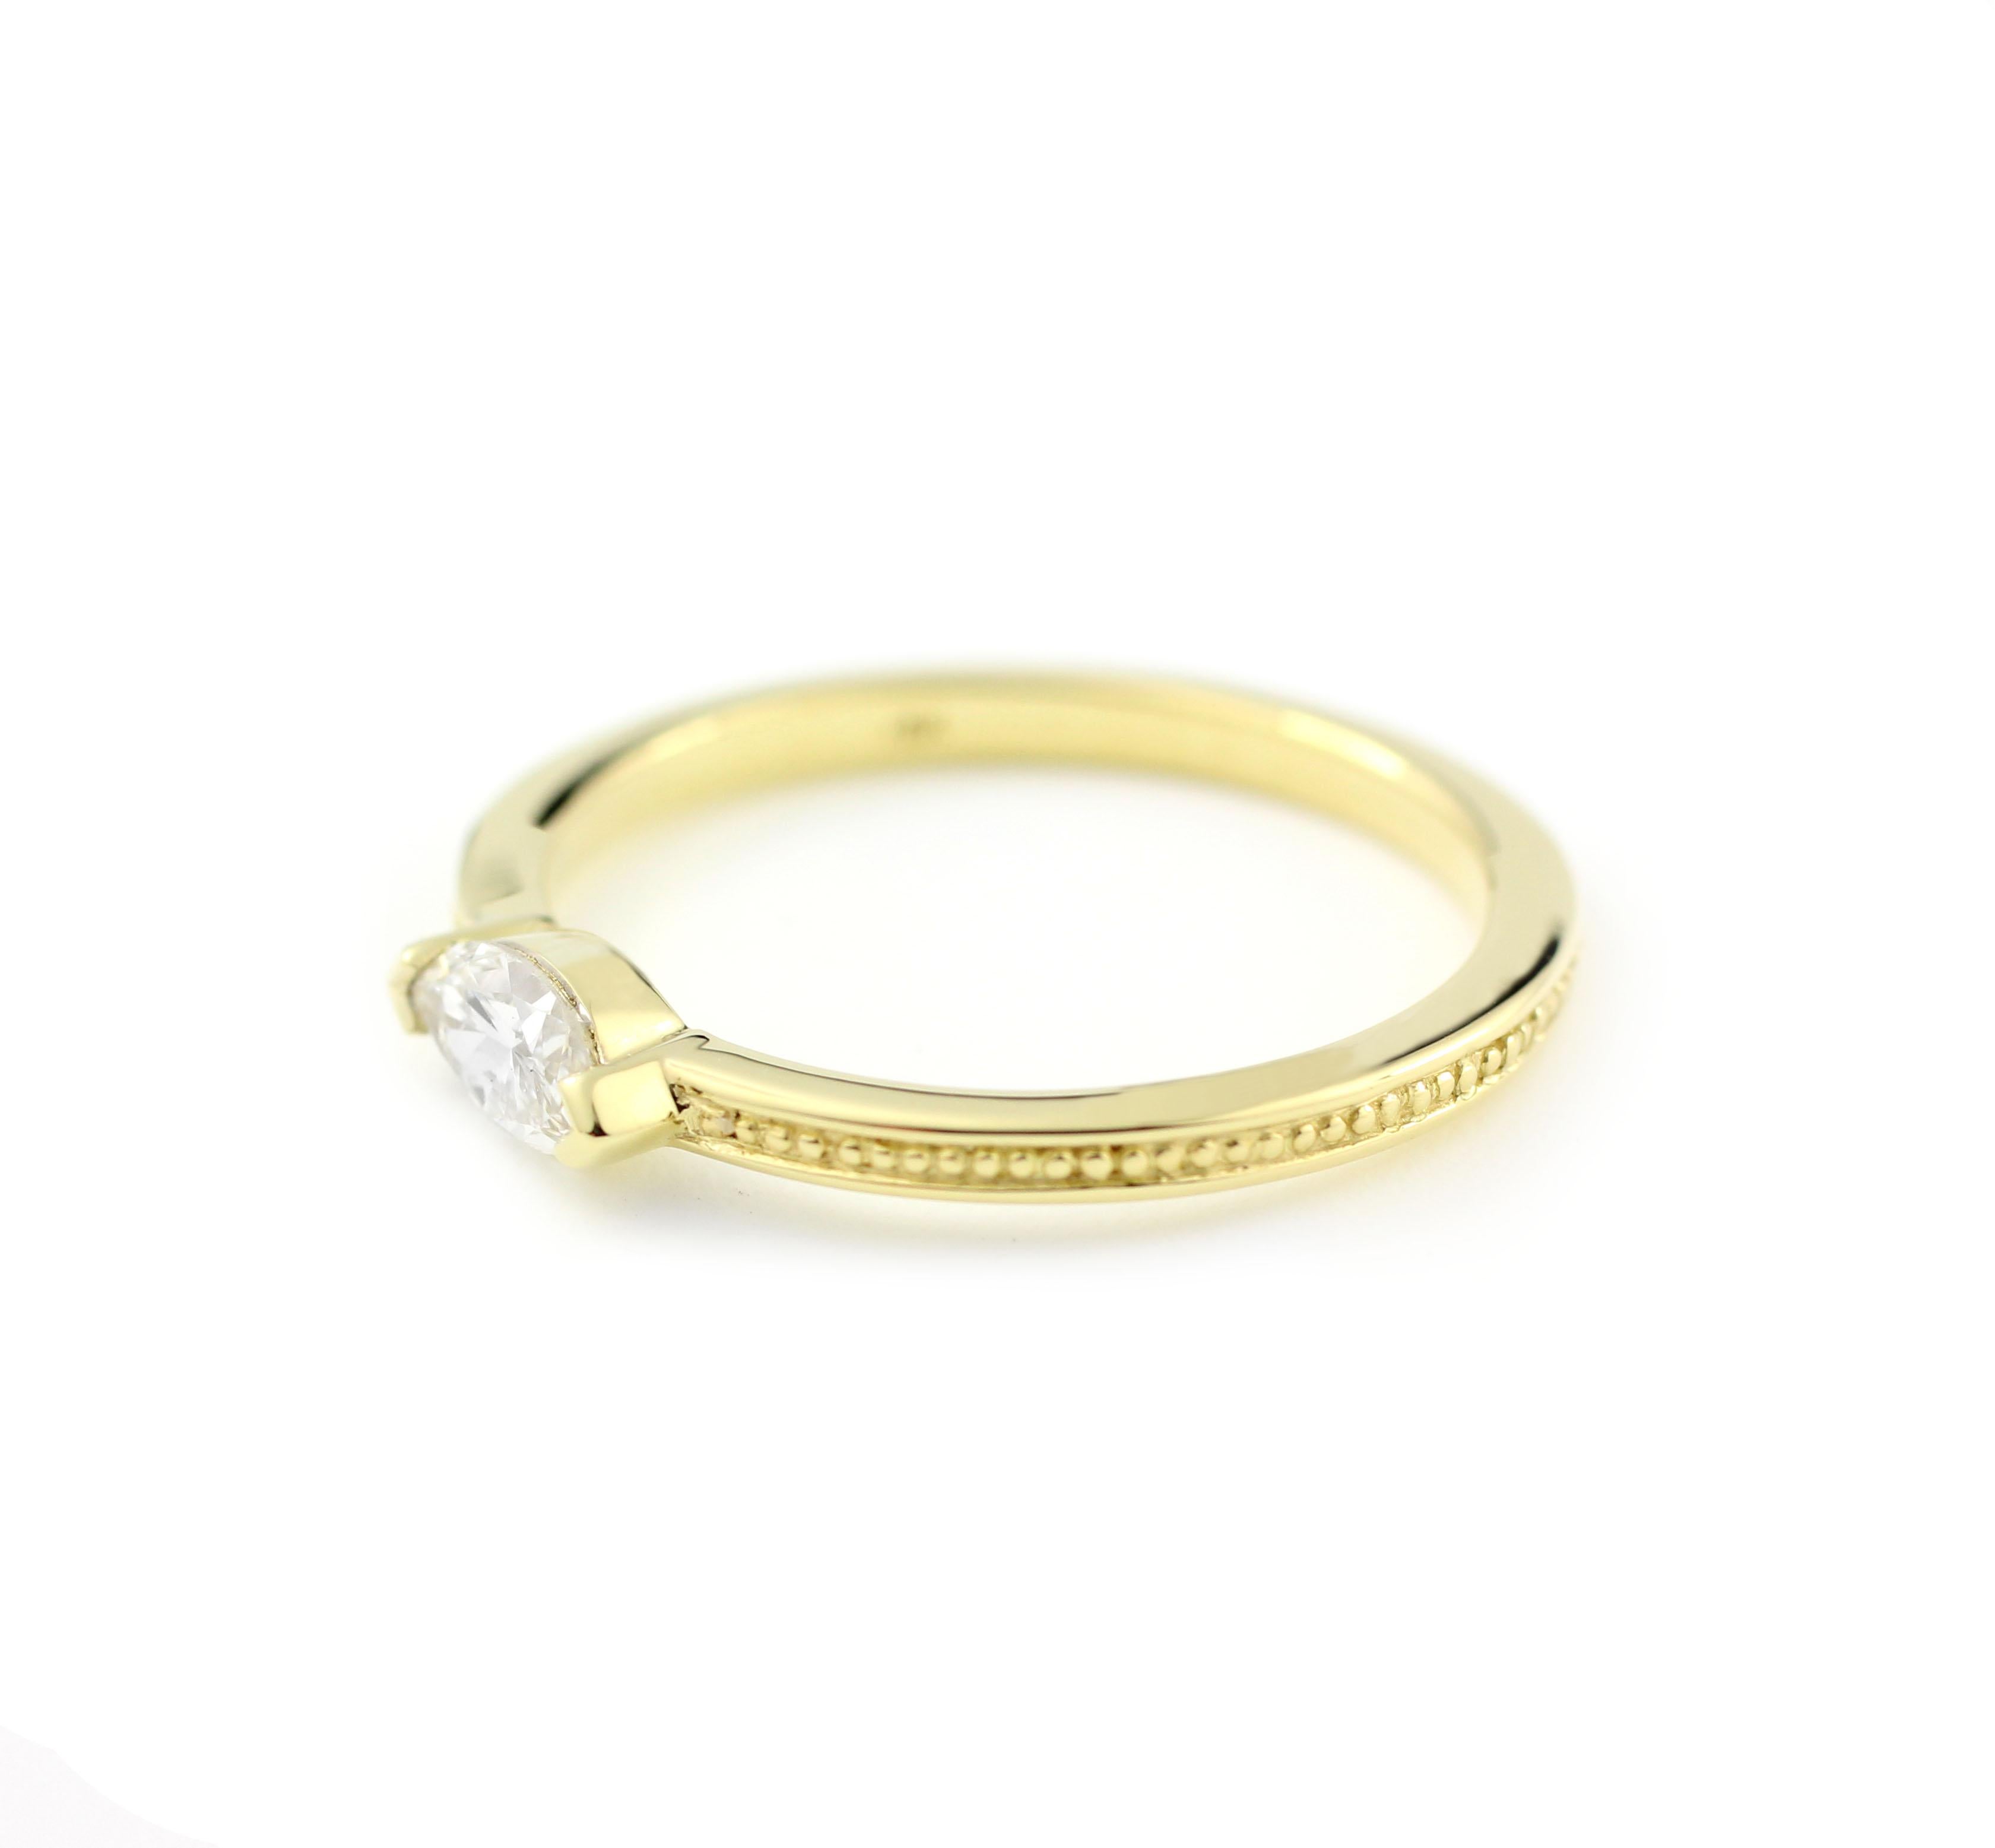 18 Kt Yellow Gold and Marquise Diamond Ring

This ring blends the ancient style of a finely beaded band detail with the modern setting of one Marquise Diamond (.34 Cts.).  The Diamond is clear and bright, measuring 6.7mm x 3.5mm and rated